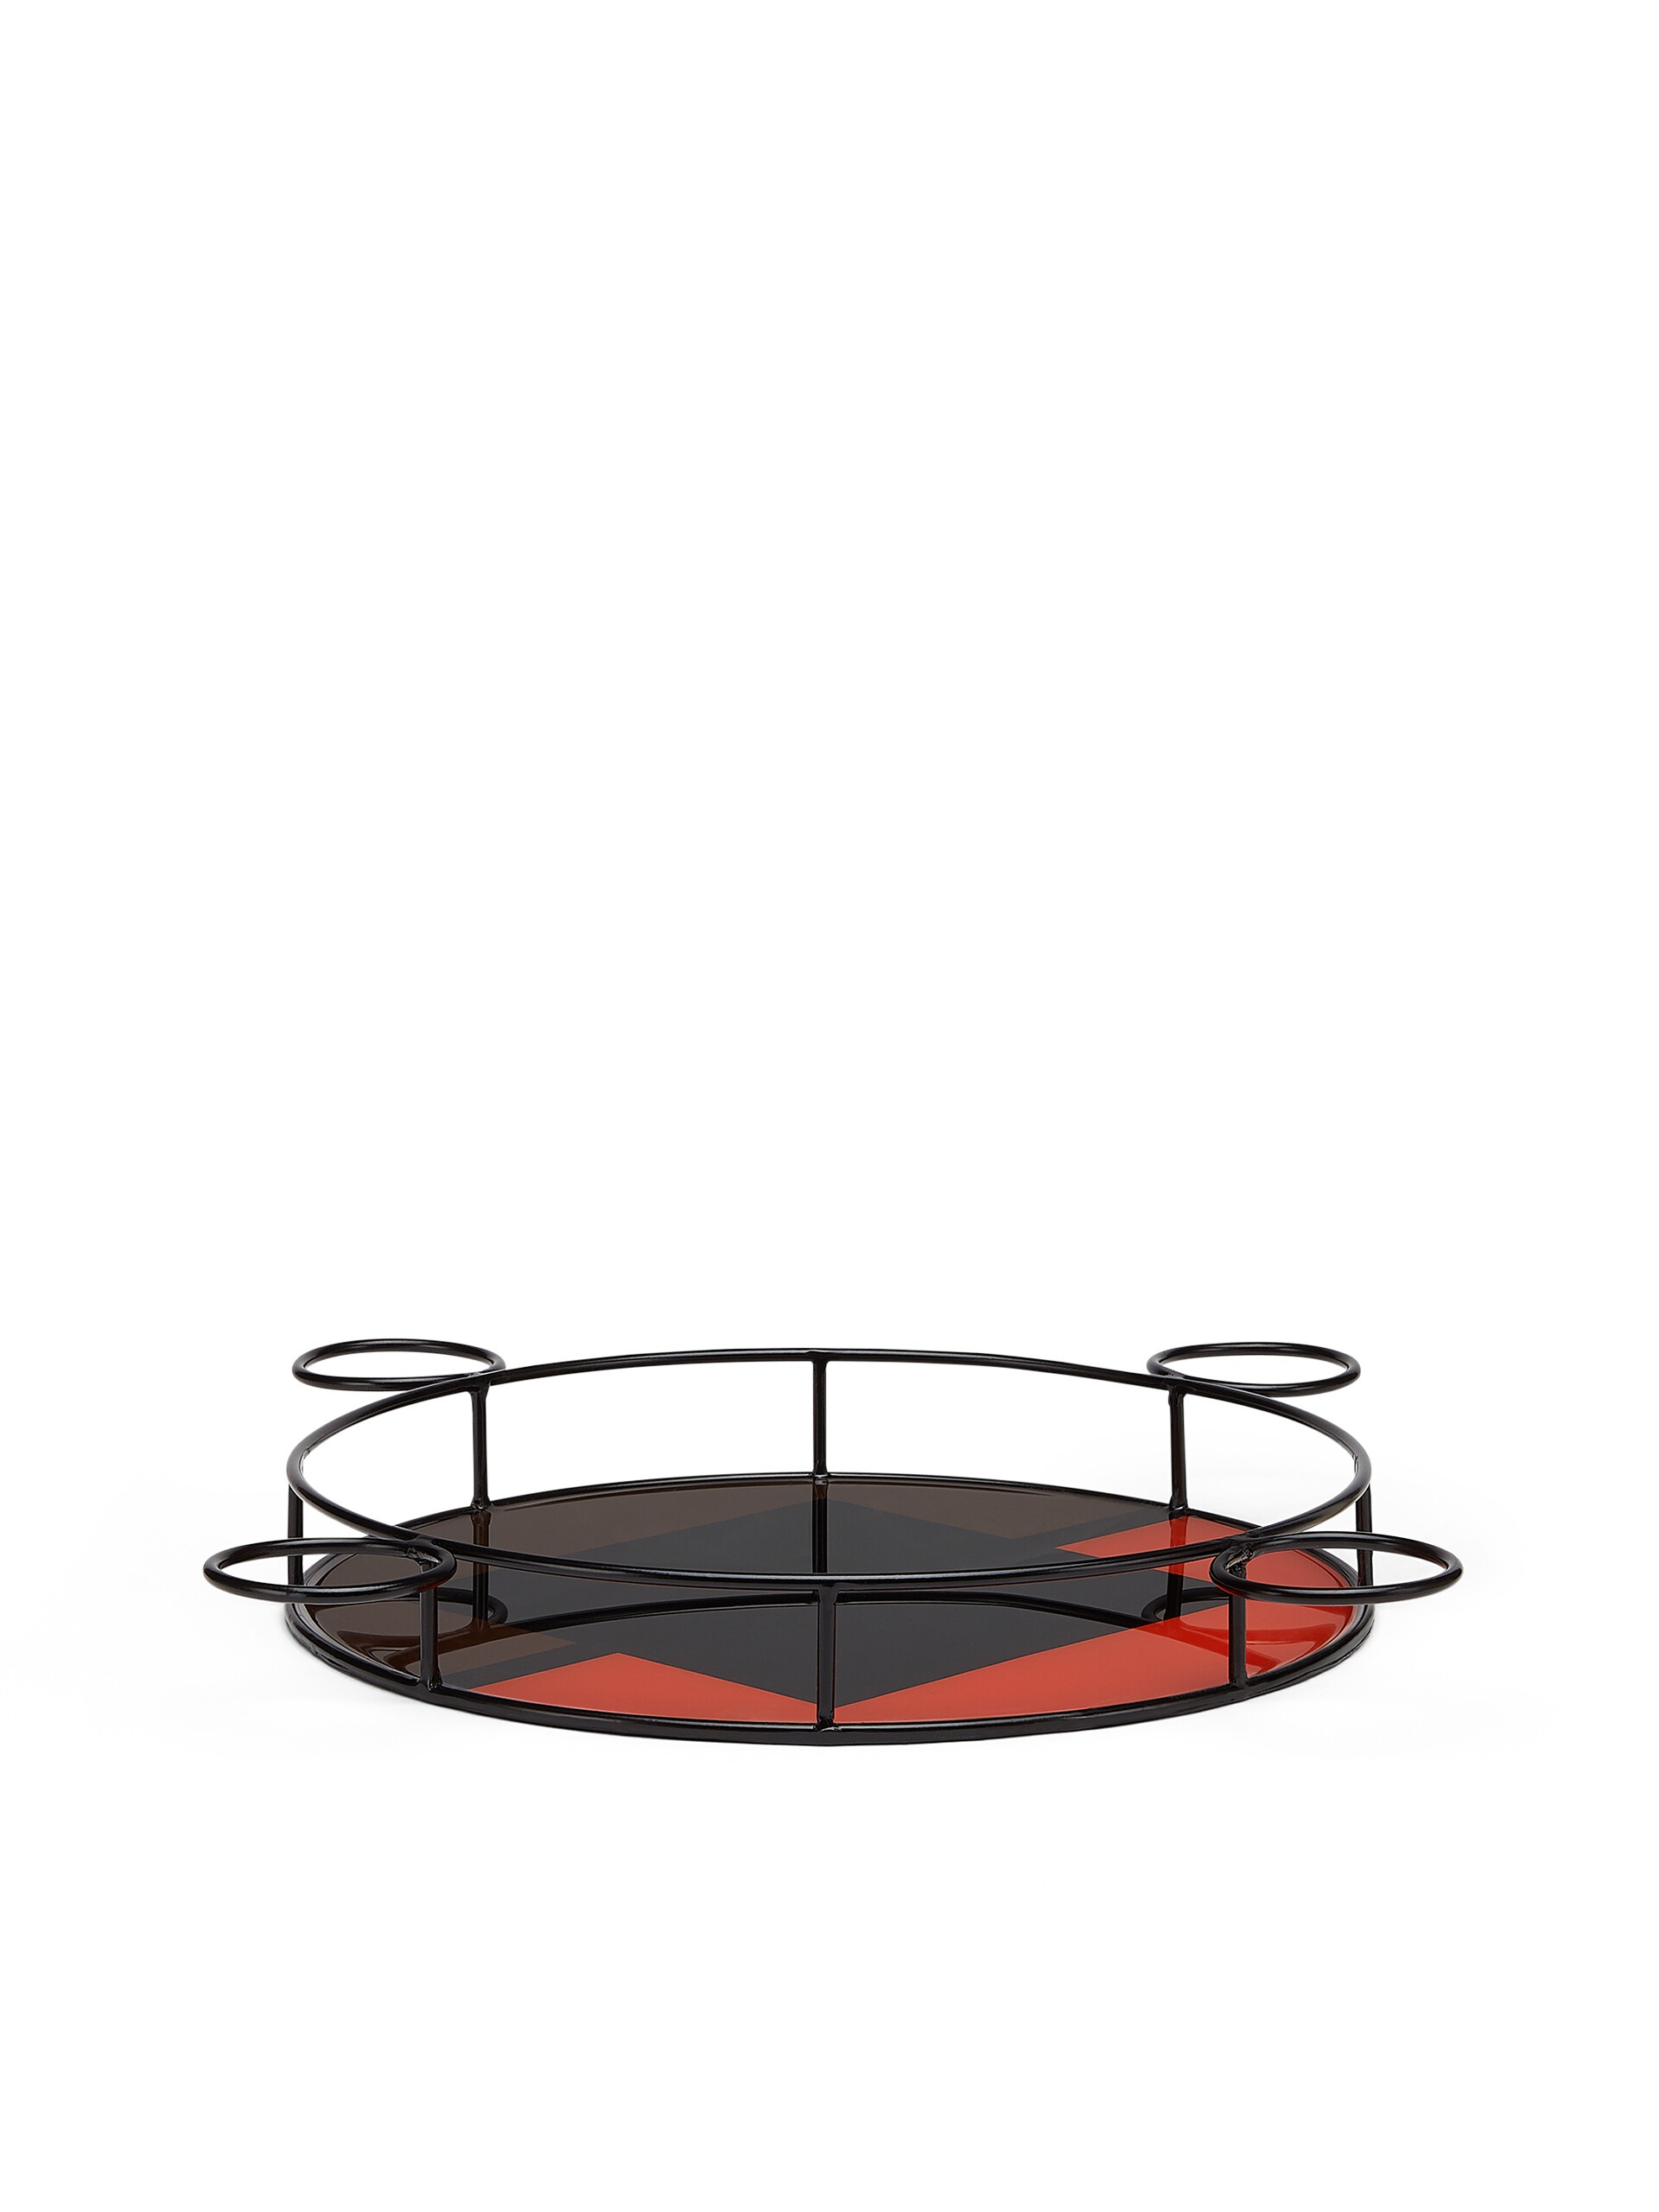 MARNI MARKET ROUND TRAY IN IRON AND RED, BROWN AND BLACK RESIN - 2